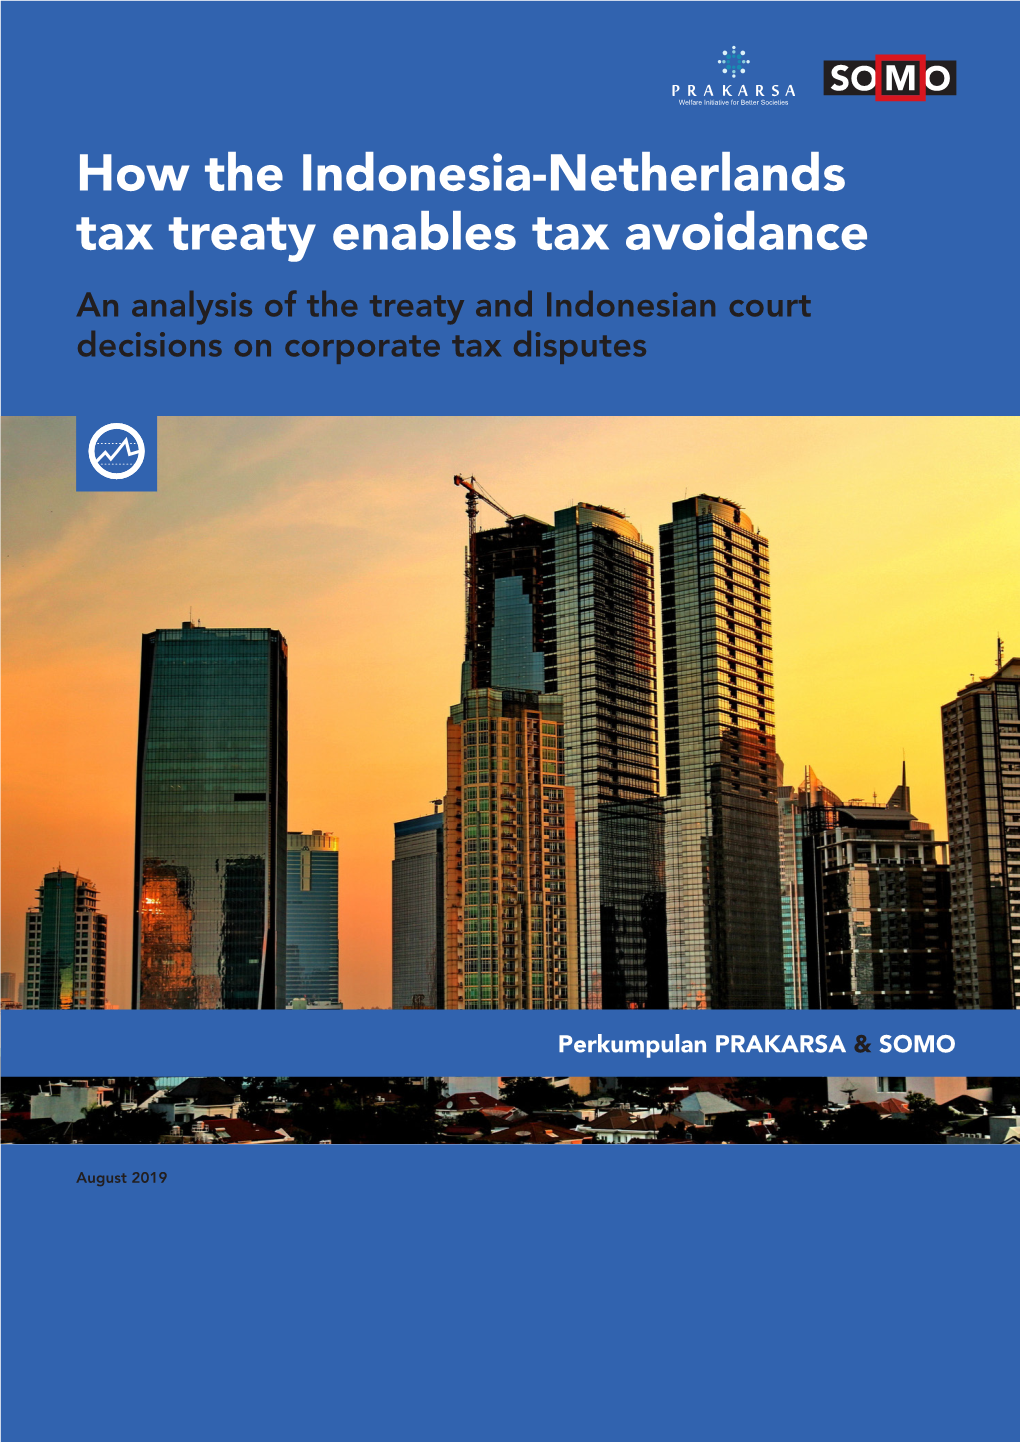 How the Indonesia-Netherlands Tax Treaty Enables Tax Avoidance an Analysis of the Treaty and Indonesian Court Decisions on Corporate Tax Disputes